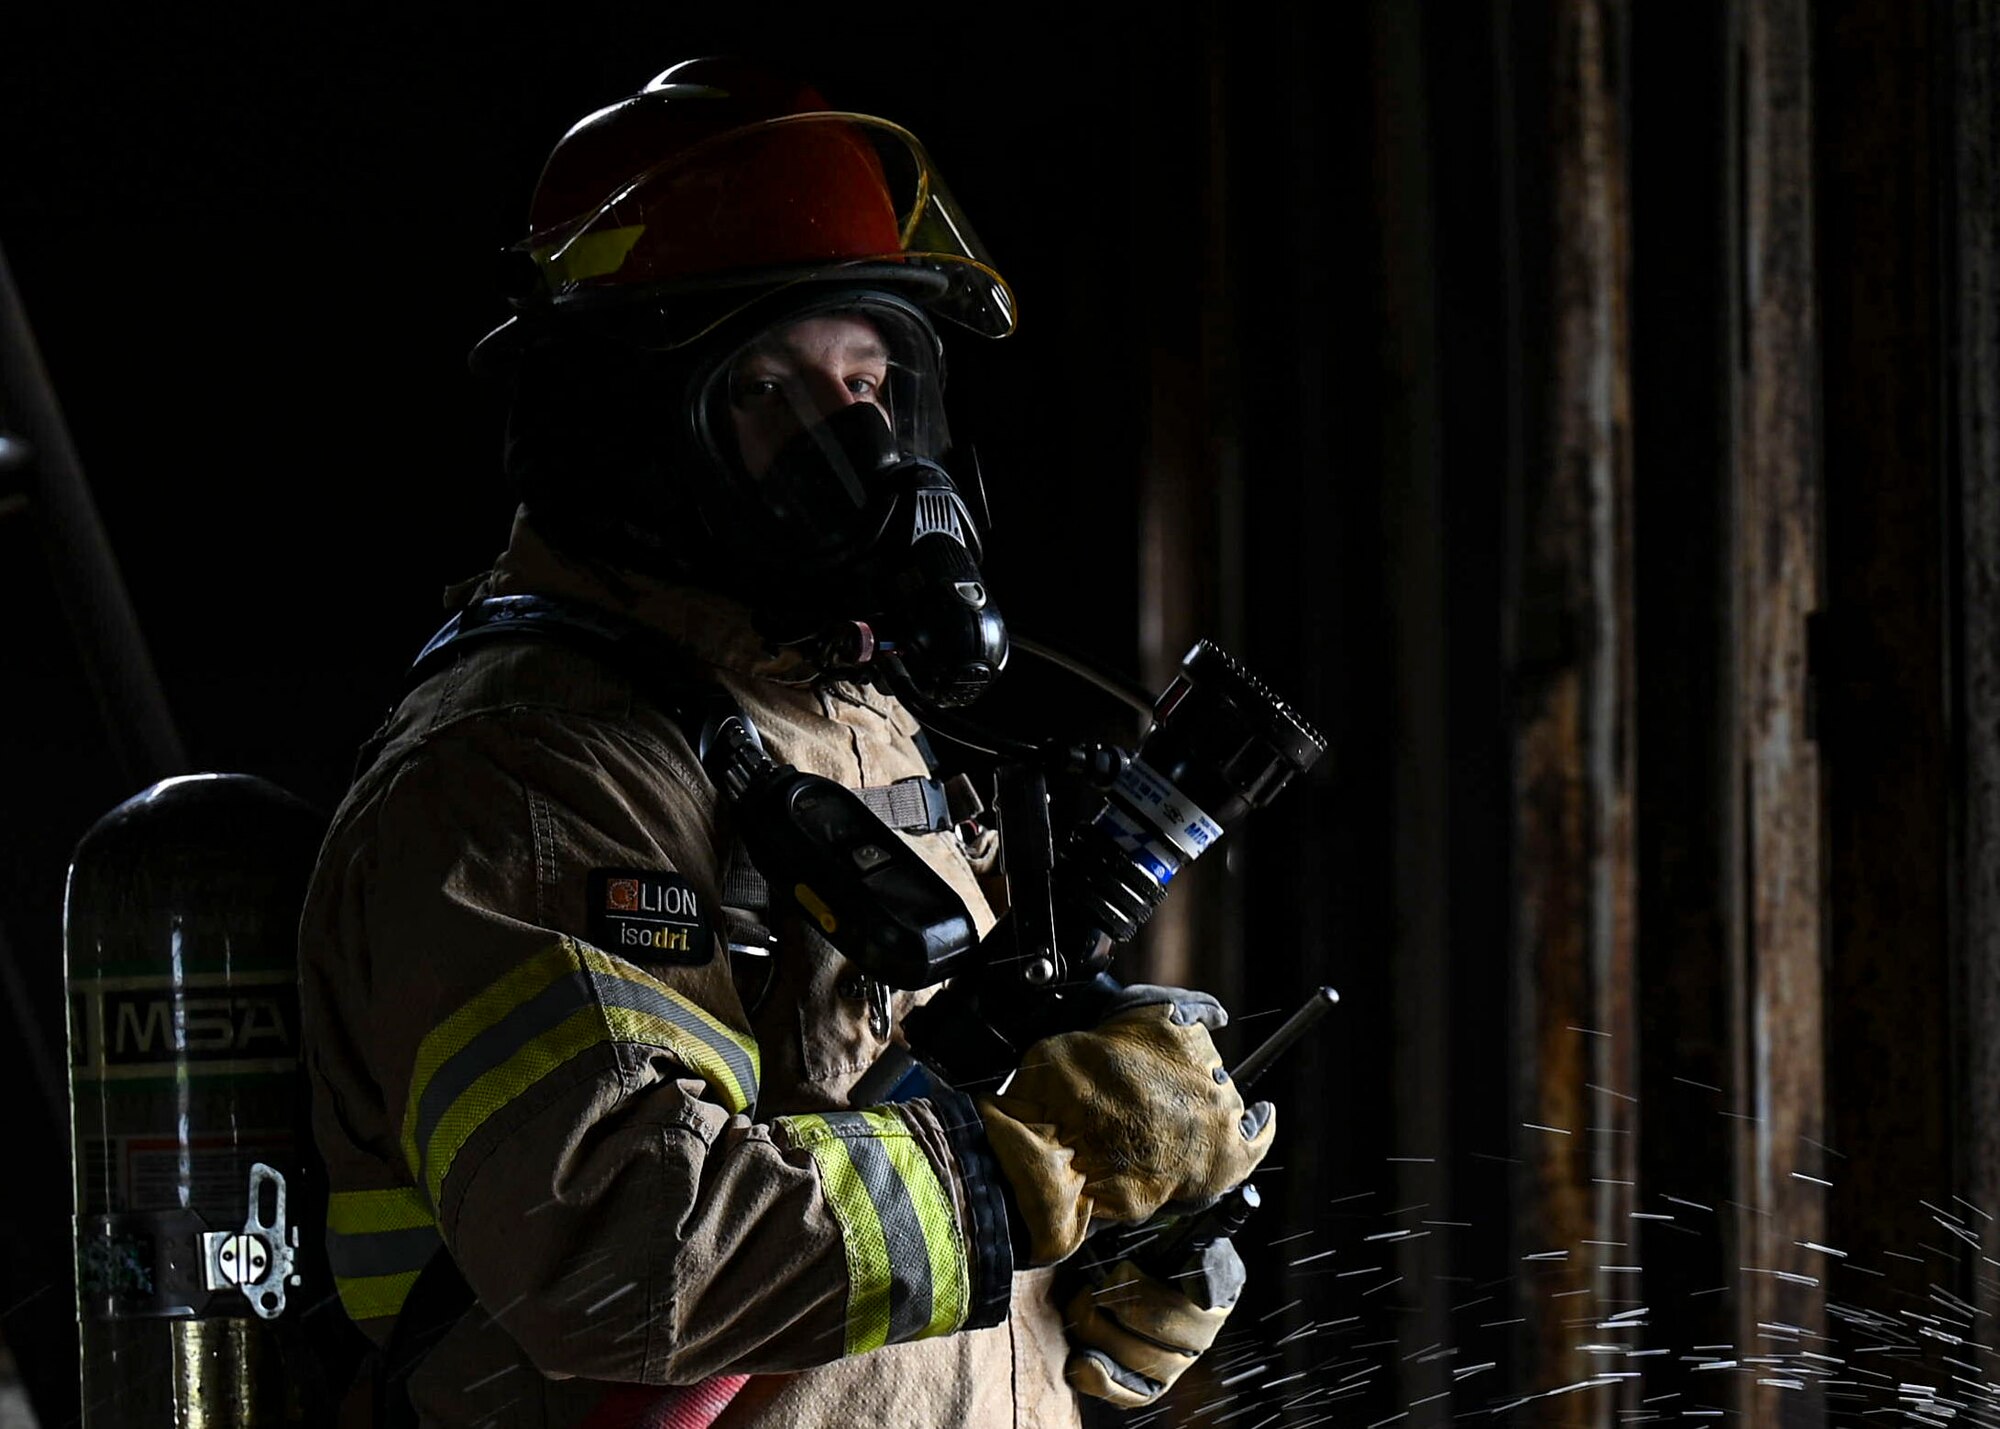 This training allows firemen to remain proficient and successfully respond to real-world emergencies.